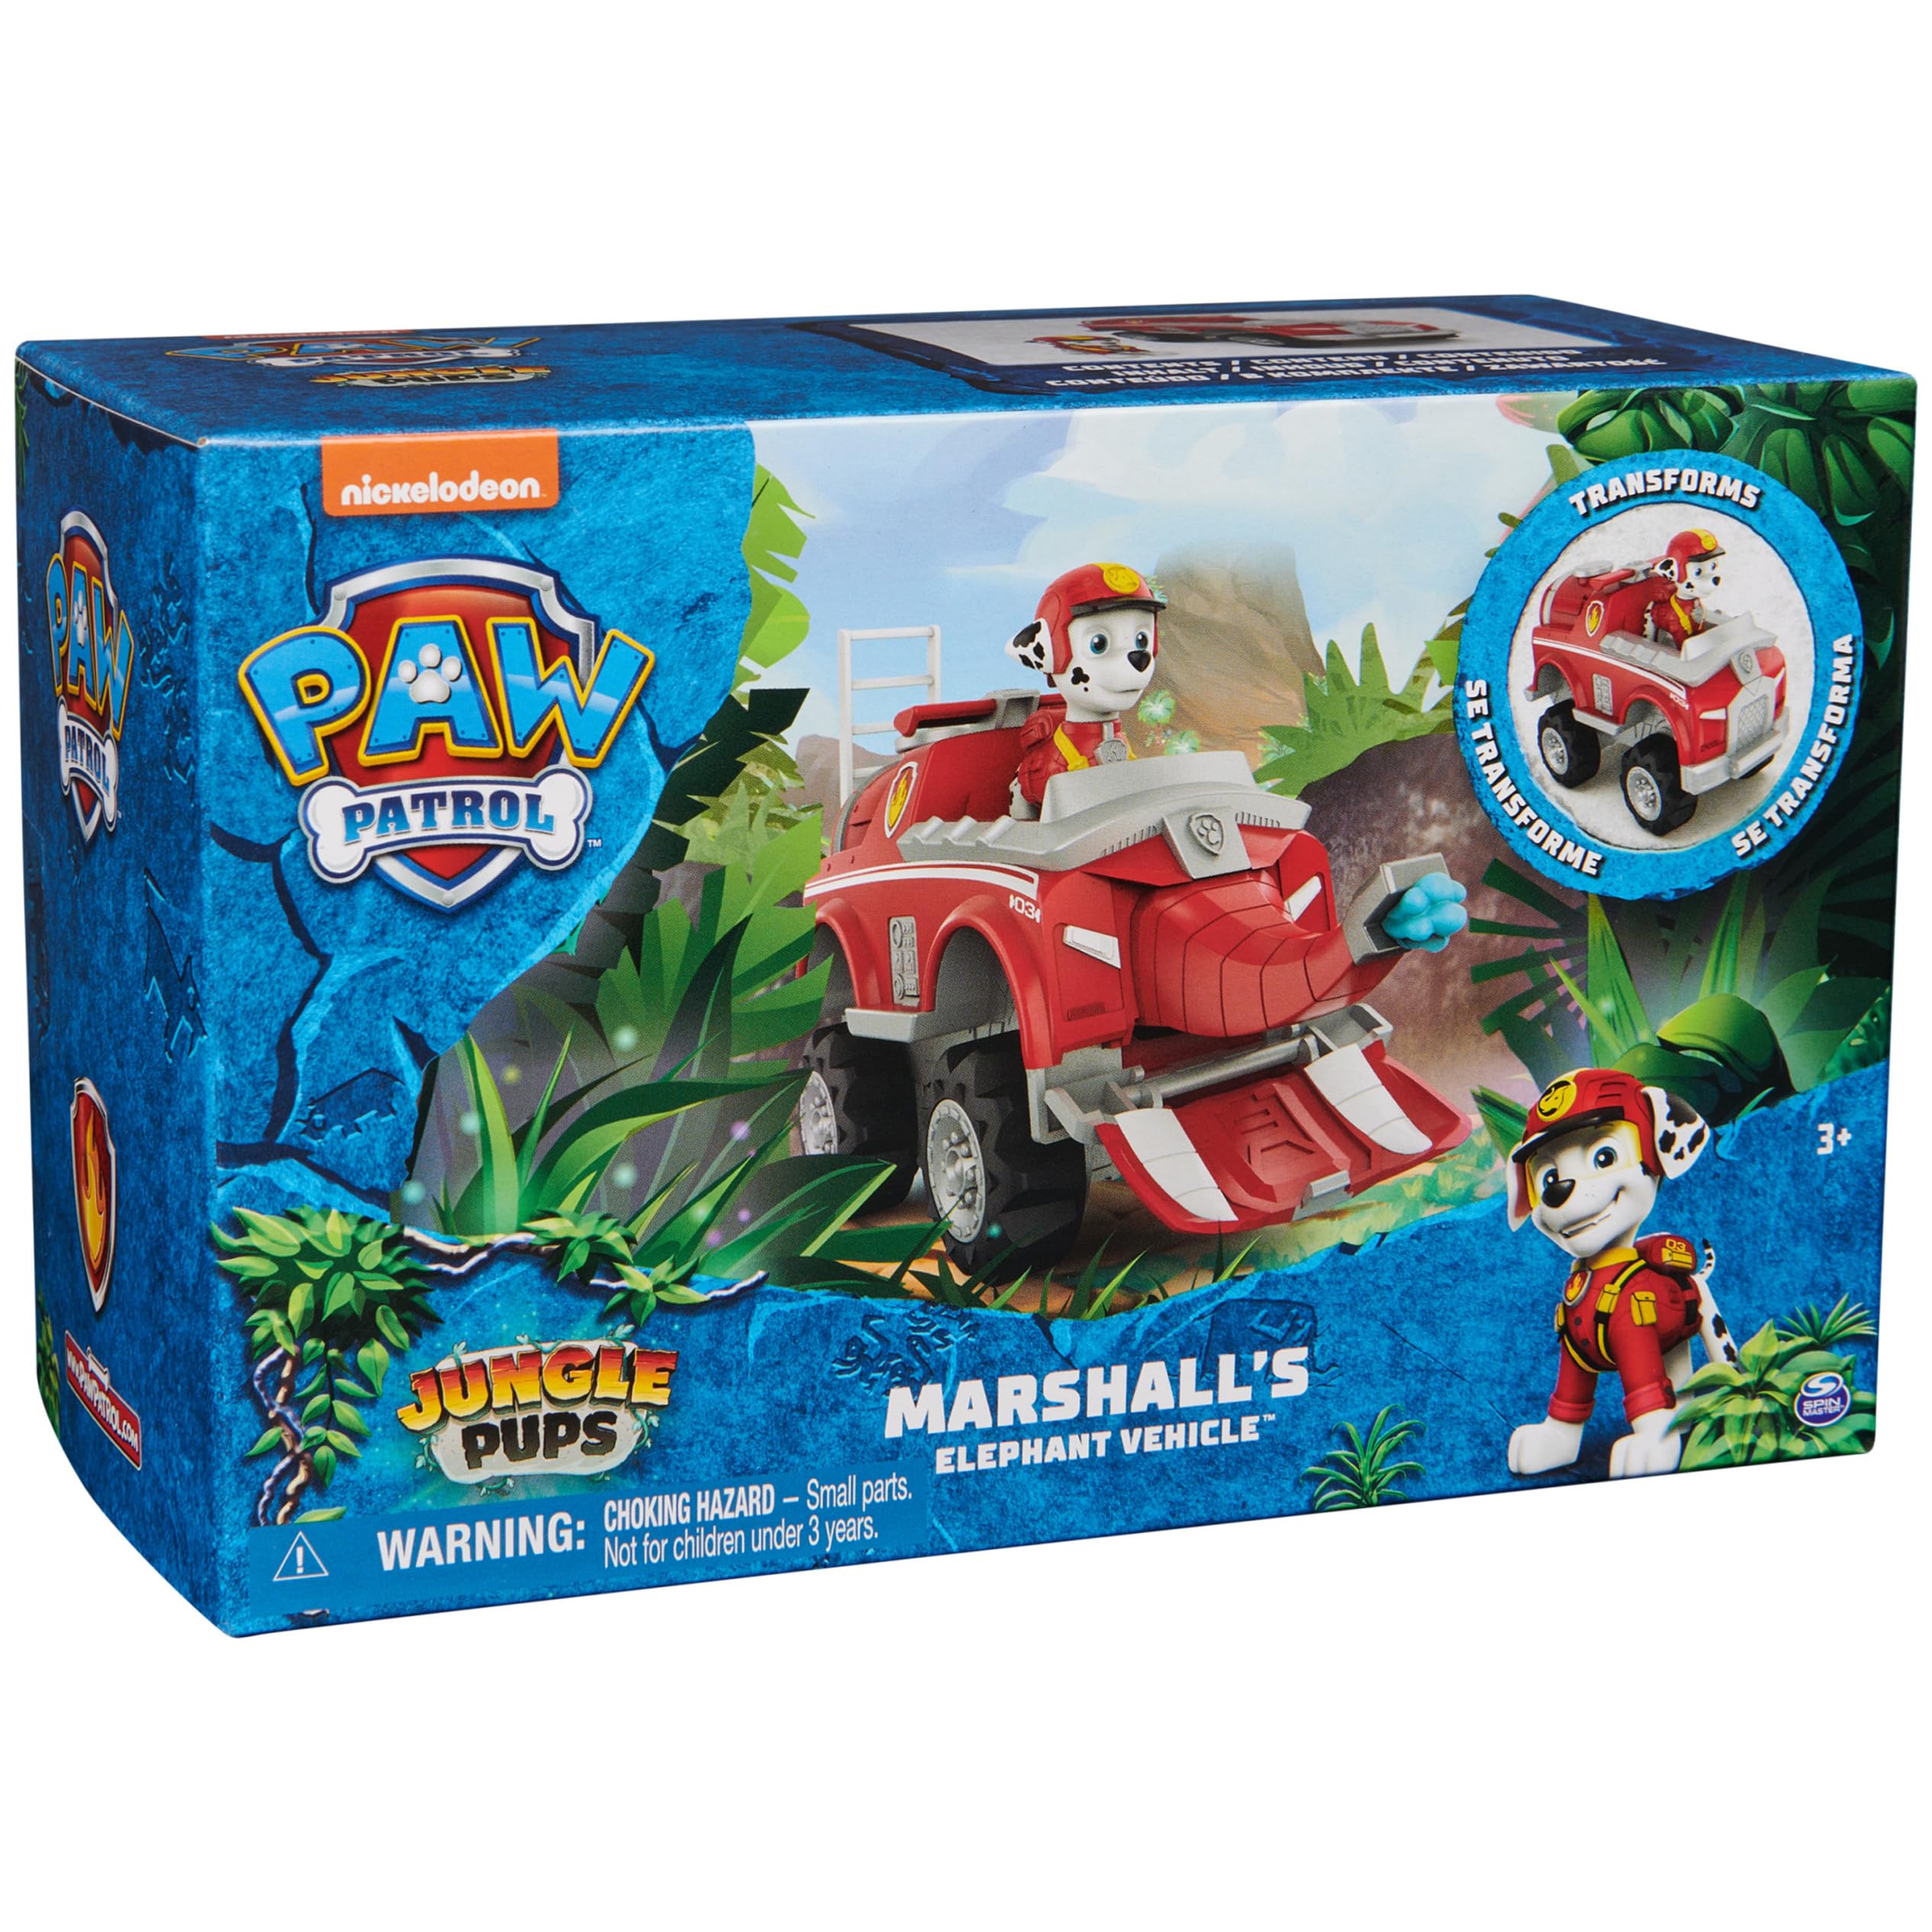 Paw Patrol Jungle Pups, Marshall Elephant Vehicle, Toy Truck with Collectible Action Figure, Kids Toys for Boys & Girls Ages 3 and Up